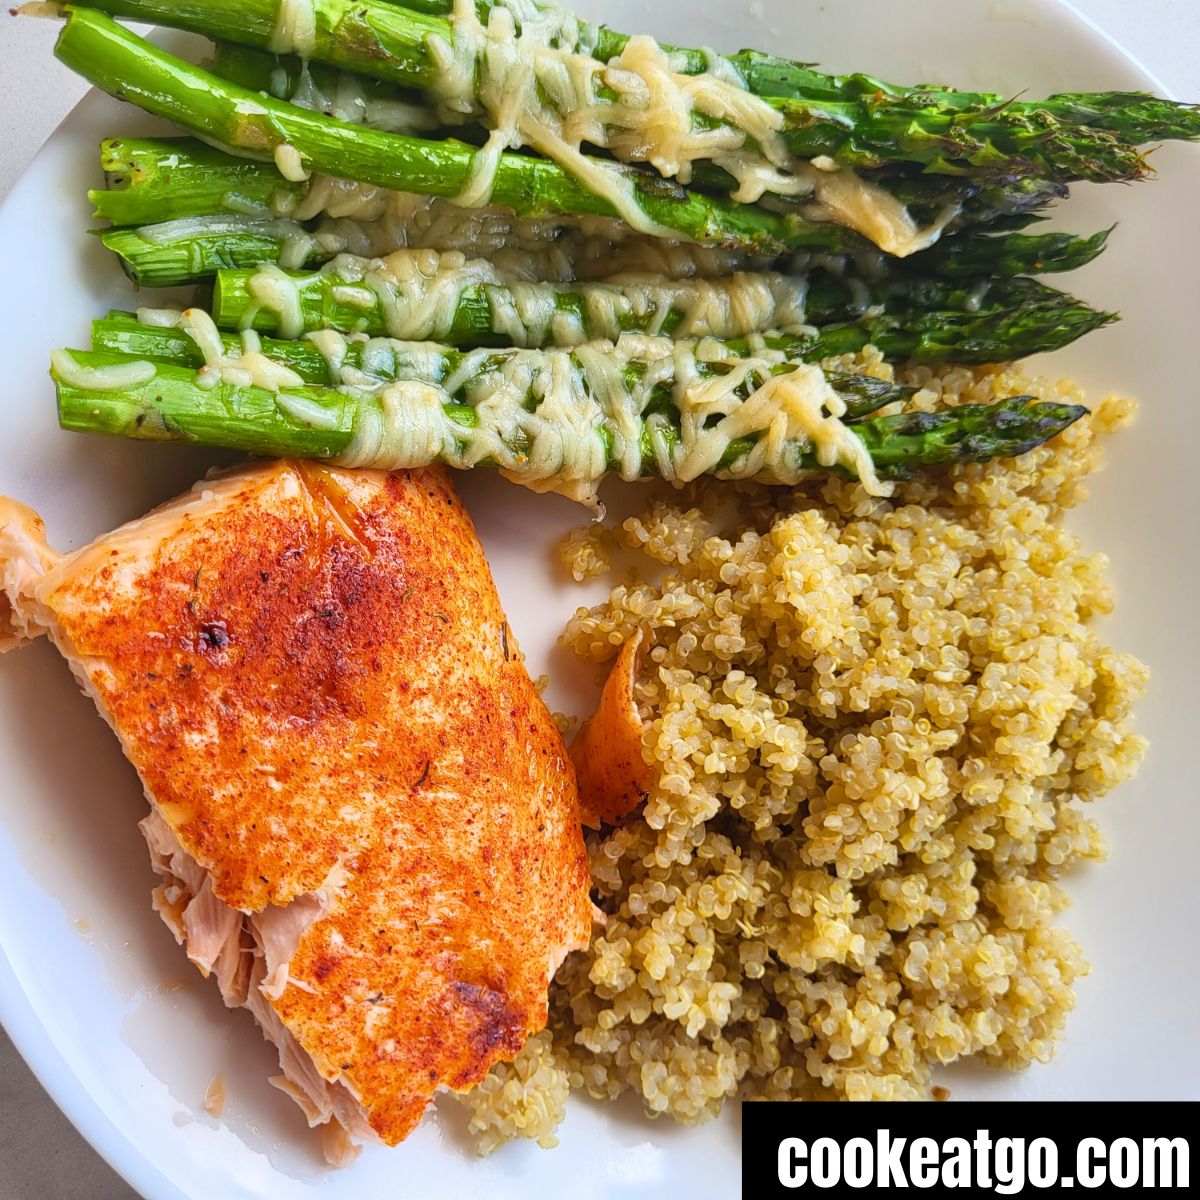 Oven Roasted Parmesan Asparagus served with air fryer salmon and crockpot quiona